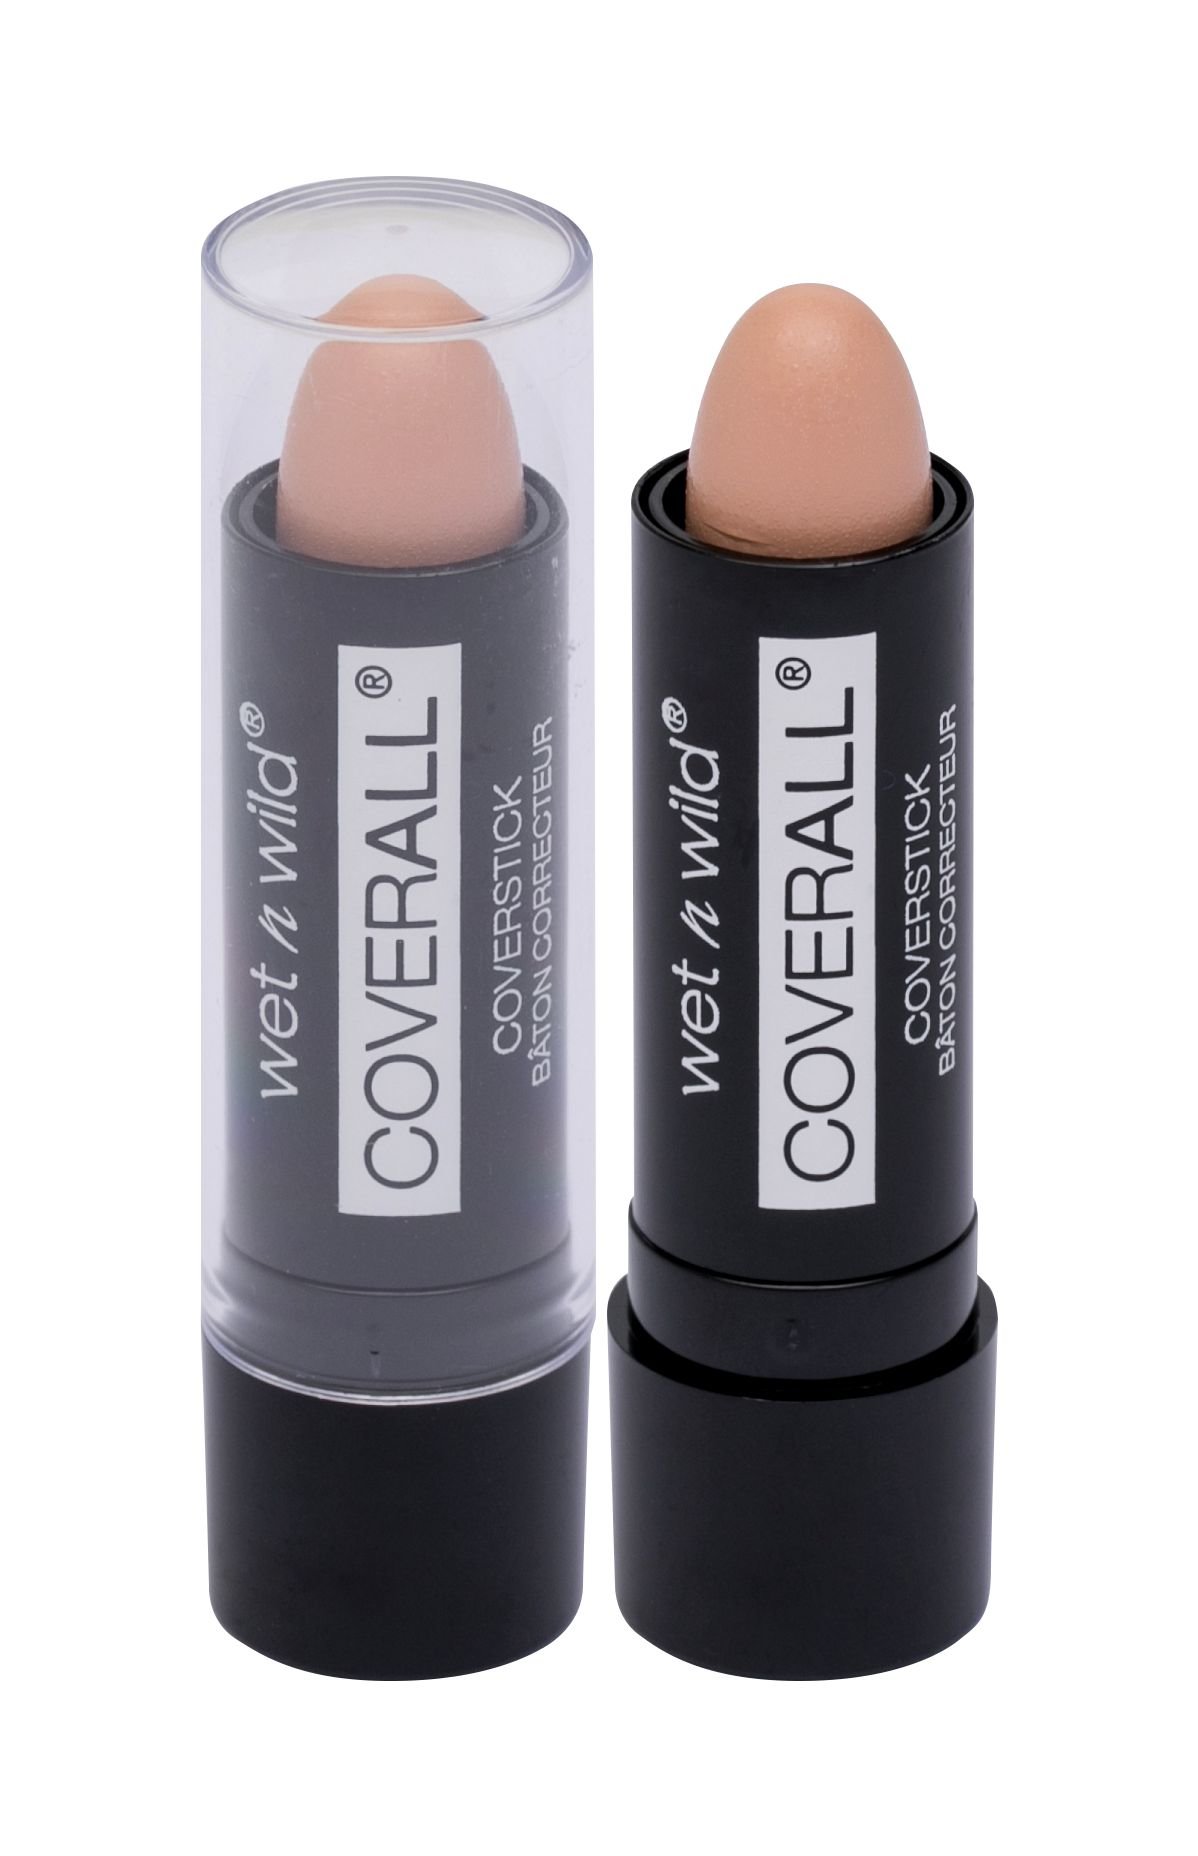 Wet n Wild CoverAll